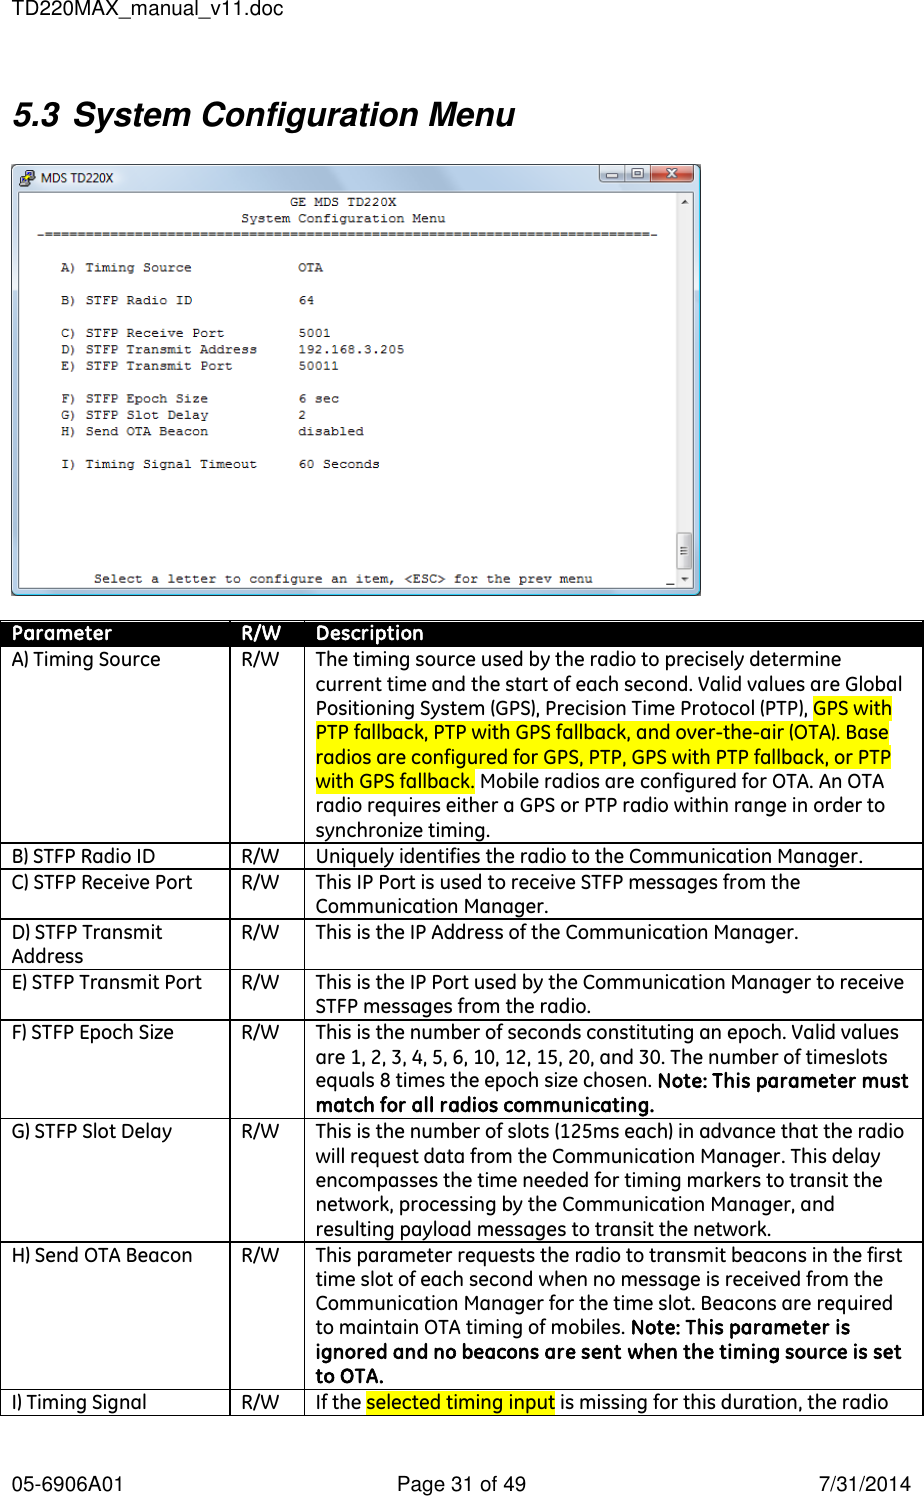 TD220MAX_manual_v11.doc 05-6906A01  Page 31 of 49  7/31/2014 5.3 System Configuration Menu    Parameter R/W Description A) Timing Source R/W The timing source used by the radio to precisely determine current time and the start of each second. Valid values are Global Positioning System (GPS), Precision Time Protocol (PTP), GPS with PTP fallback, PTP with GPS fallback, and over-the-air (OTA). Base radios are configured for GPS, PTP, GPS with PTP fallback, or PTP with GPS fallback. Mobile radios are configured for OTA. An OTA radio requires either a GPS or PTP radio within range in order to synchronize timing. B) STFP Radio ID R/W Uniquely identifies the radio to the Communication Manager. C) STFP Receive Port R/W This IP Port is used to receive STFP messages from the Communication Manager. D) STFP Transmit Address R/W This is the IP Address of the Communication Manager. E) STFP Transmit Port R/W This is the IP Port used by the Communication Manager to receive STFP messages from the radio. F) STFP Epoch Size R/W This is the number of seconds constituting an epoch. Valid values are 1, 2, 3, 4, 5, 6, 10, 12, 15, 20, and 30. The number of timeslots equals 8 times the epoch size chosen. Note: This parameter must match for all radios communicating. G) STFP Slot Delay R/W This is the number of slots (125ms each) in advance that the radio will request data from the Communication Manager. This delay encompasses the time needed for timing markers to transit the network, processing by the Communication Manager, and resulting payload messages to transit the network.  H) Send OTA Beacon R/W This parameter requests the radio to transmit beacons in the first time slot of each second when no message is received from the Communication Manager for the time slot. Beacons are required to maintain OTA timing of mobiles. Note: This parameter is ignored and no beacons are sent when the timing source is set to OTA. I) Timing Signal R/W If the selected timing input is missing for this duration, the radio 